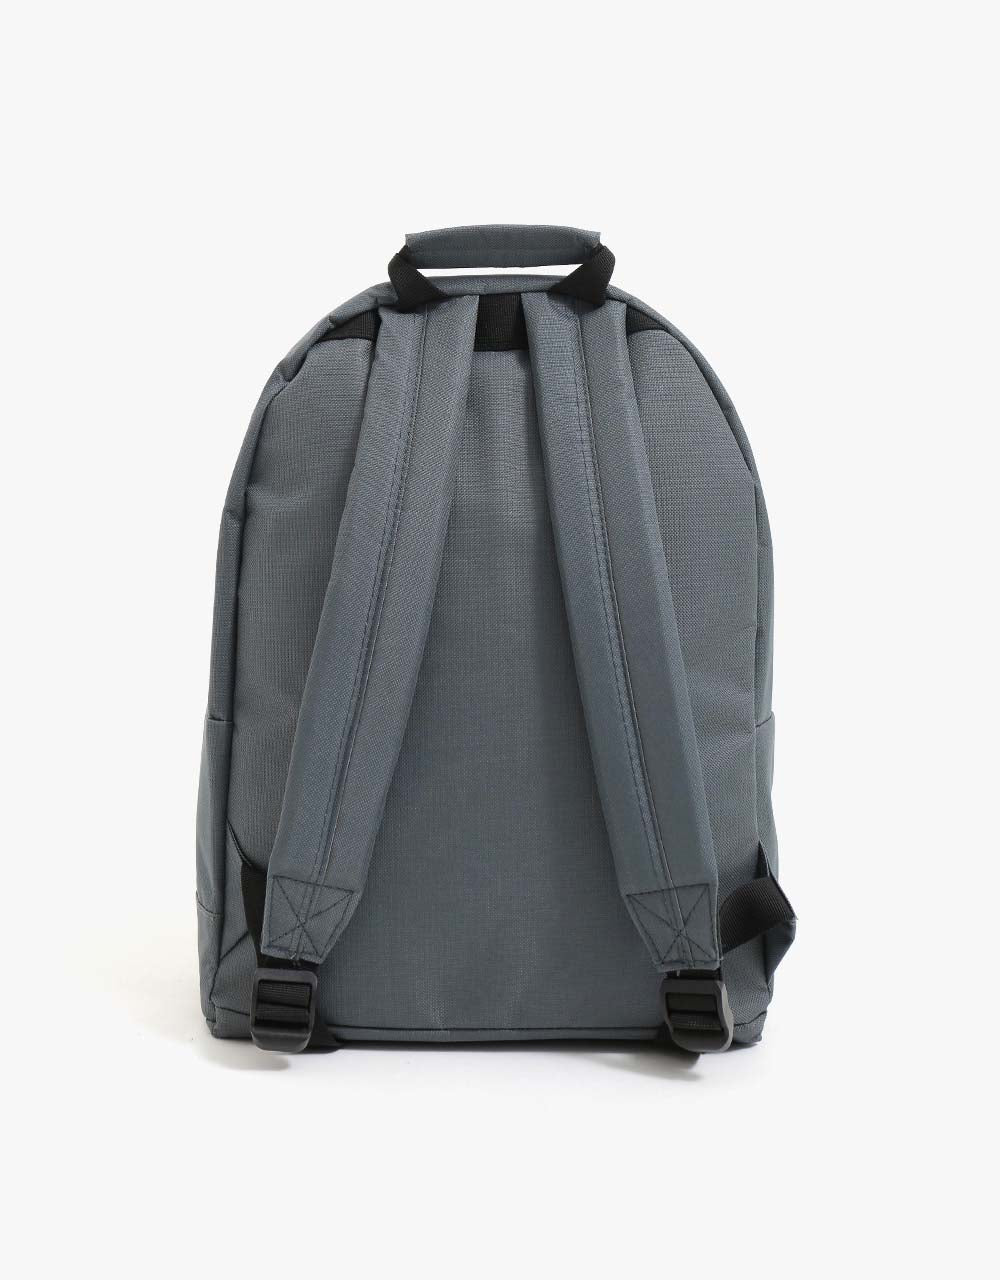 Route One Backpack - Charcoal